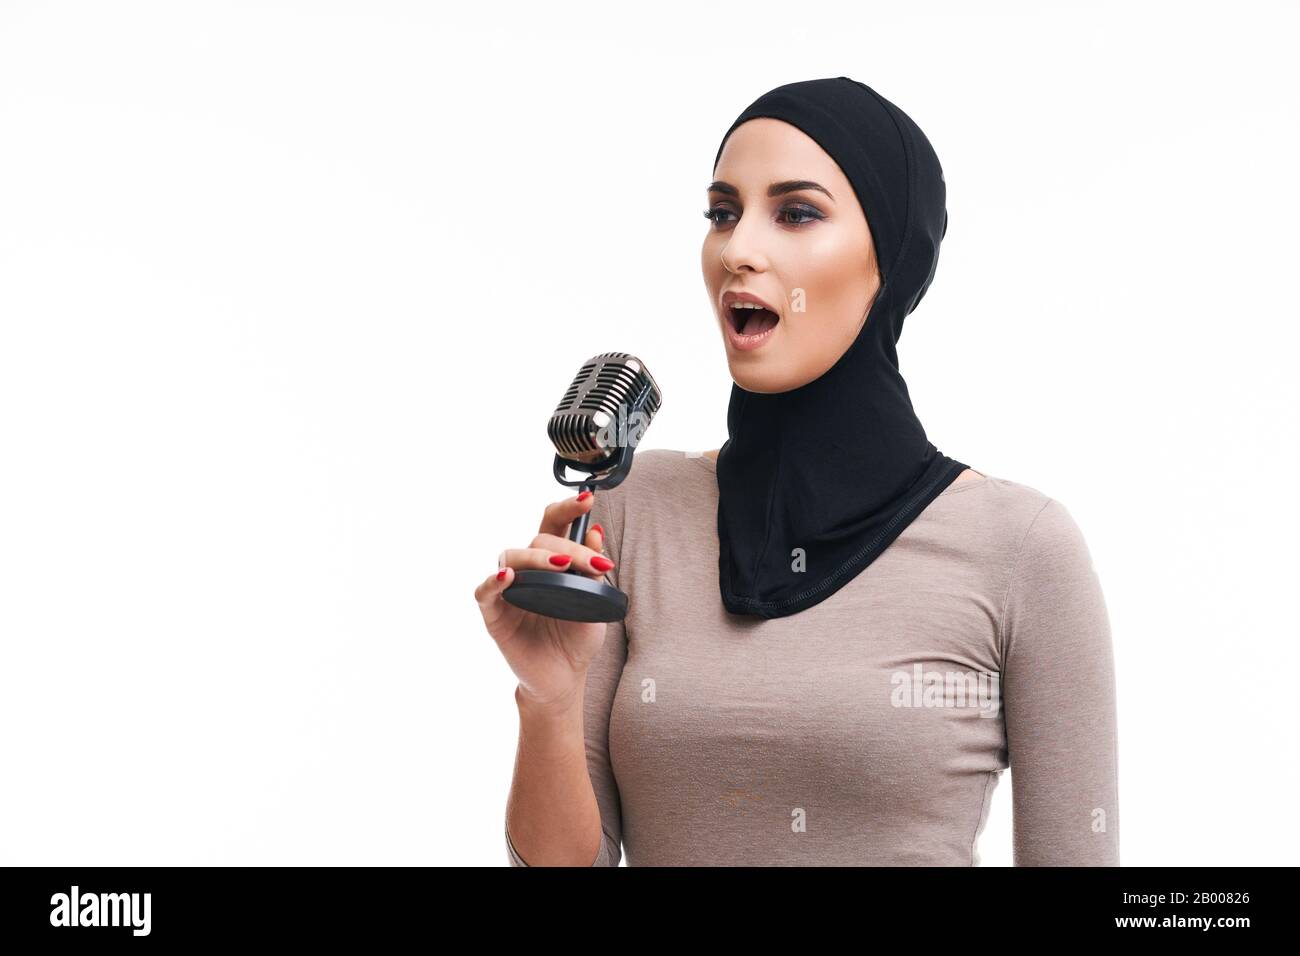 Muslim woman singing with microphone over white background Stock Photo